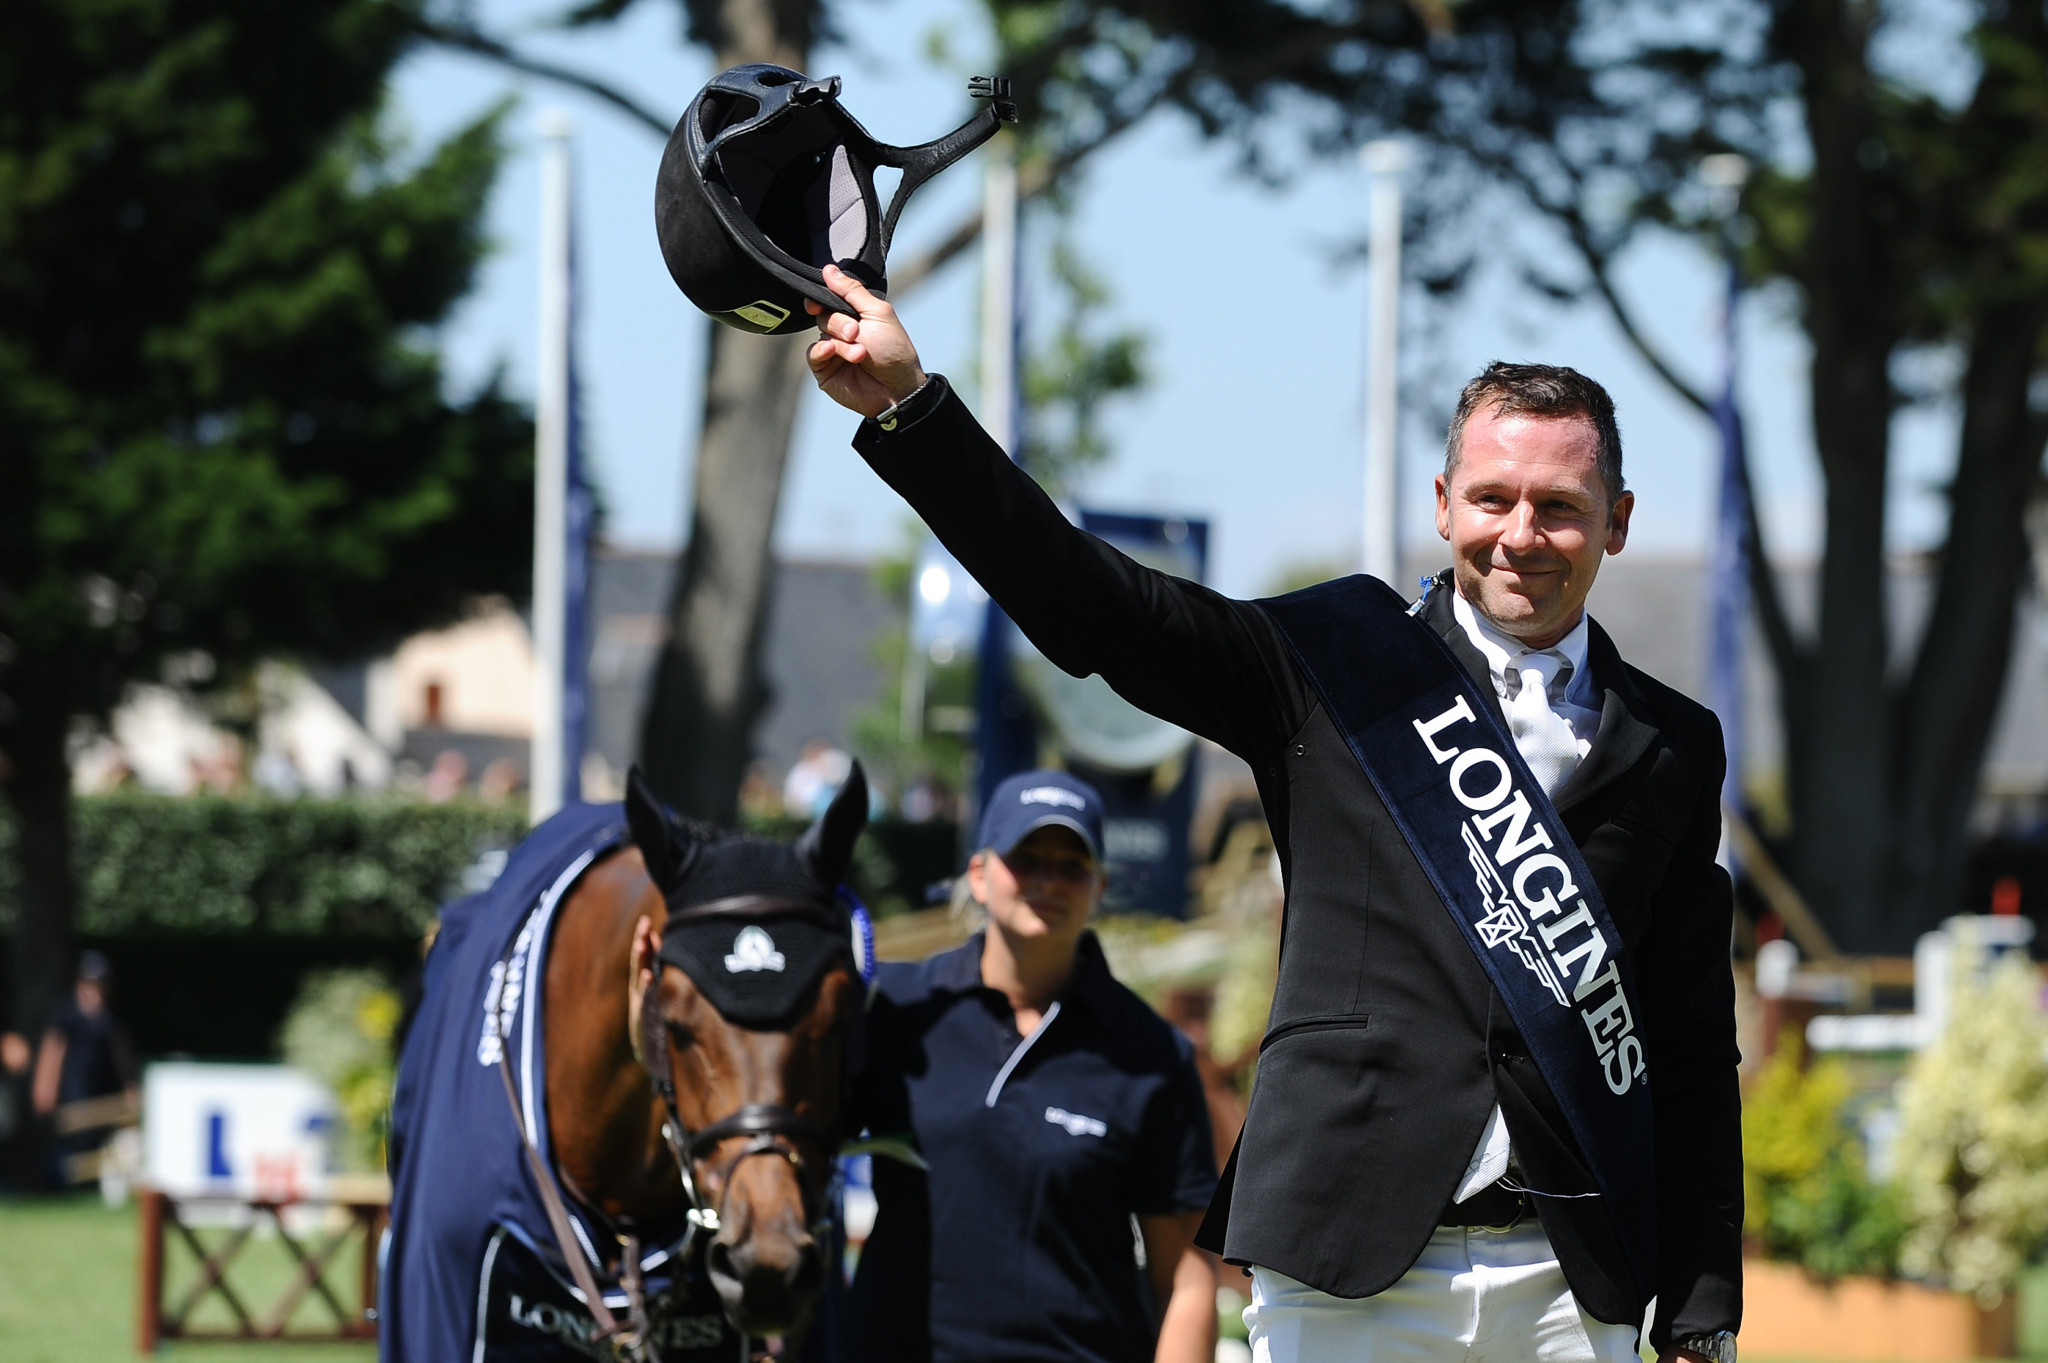 Eric Lamaze announces retirement from showjumping after stellar career